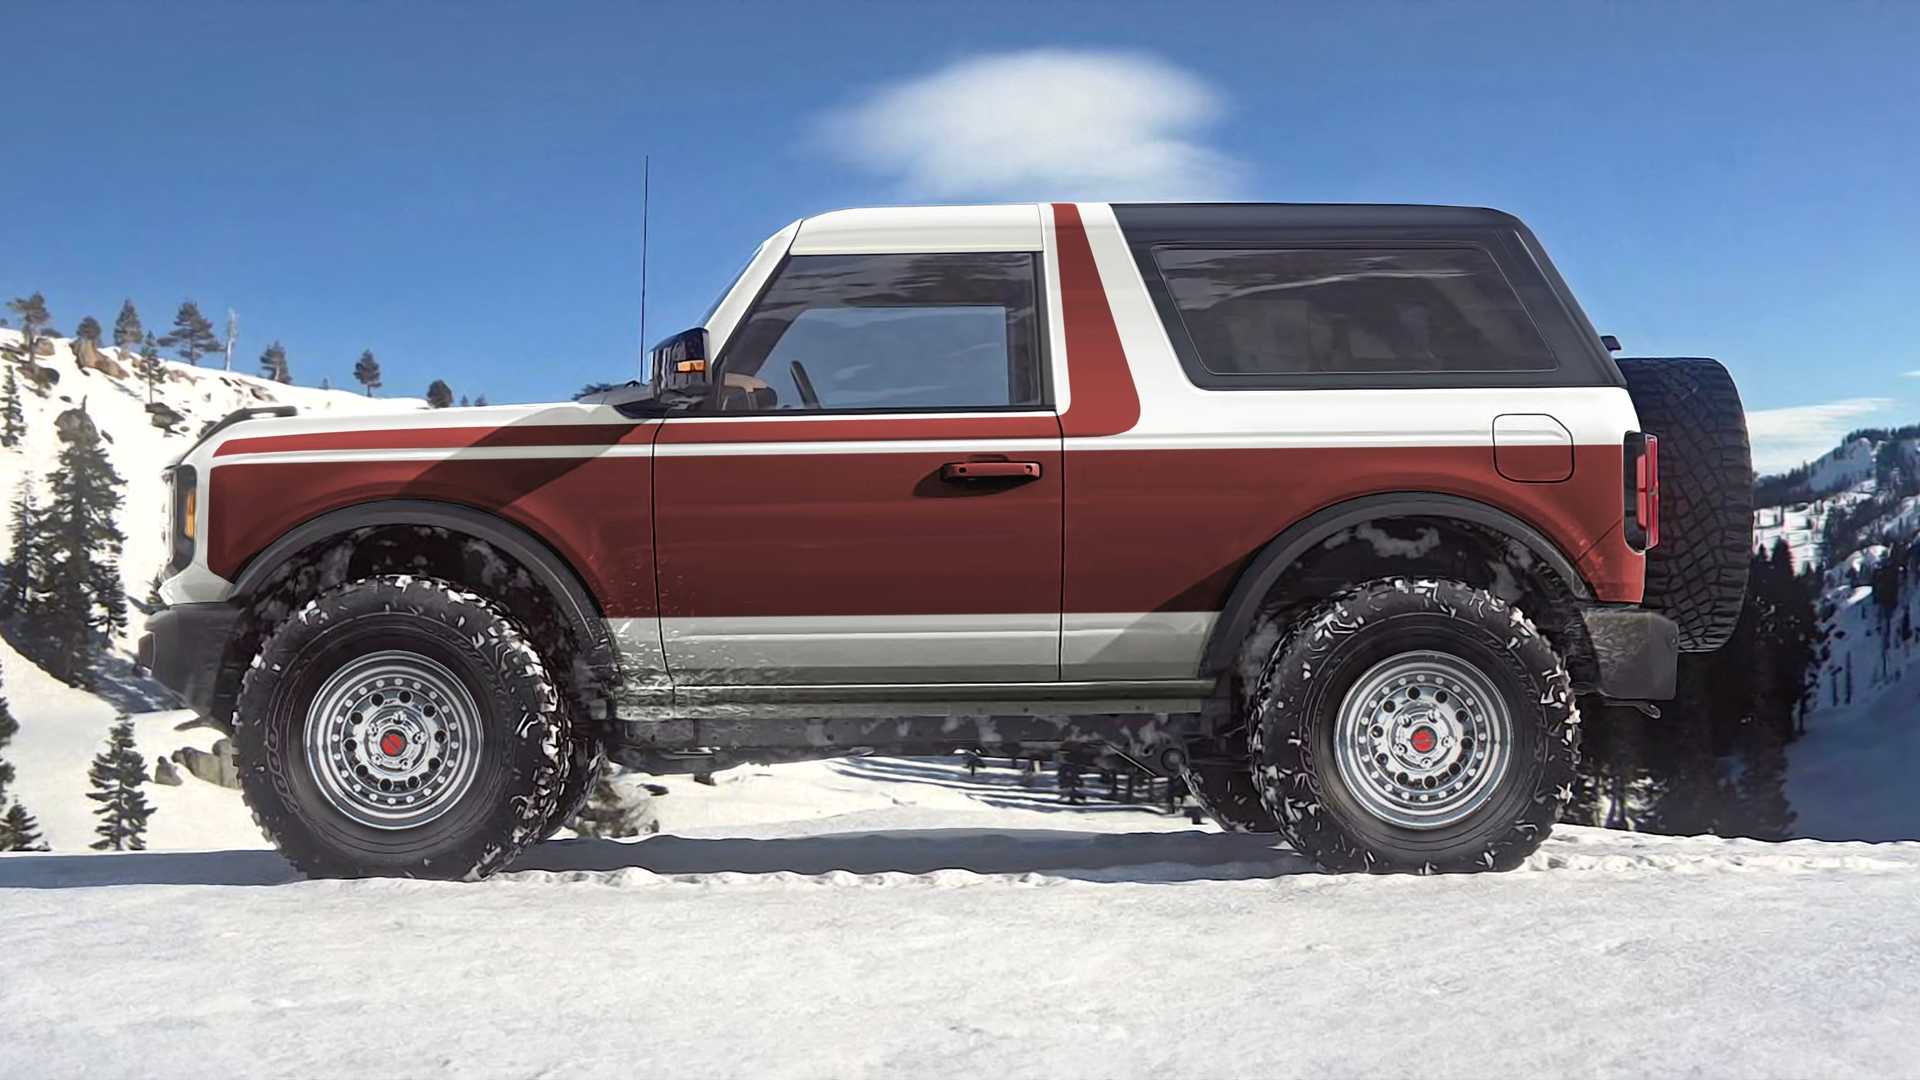 2021 ford bronco rendered back to the past looks like